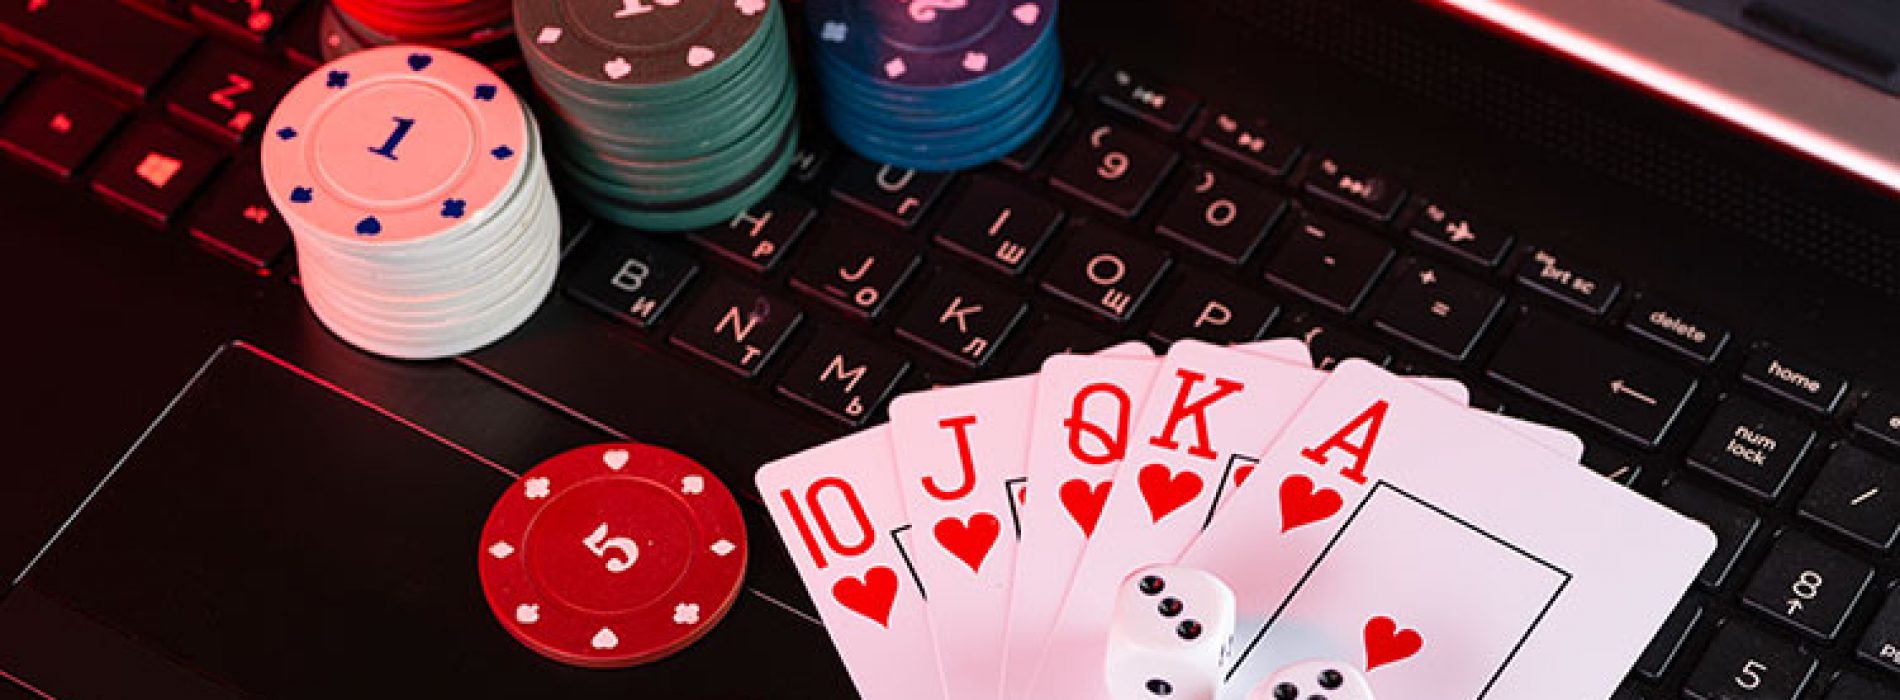 Is gambling online safe? What are the drawbacks?